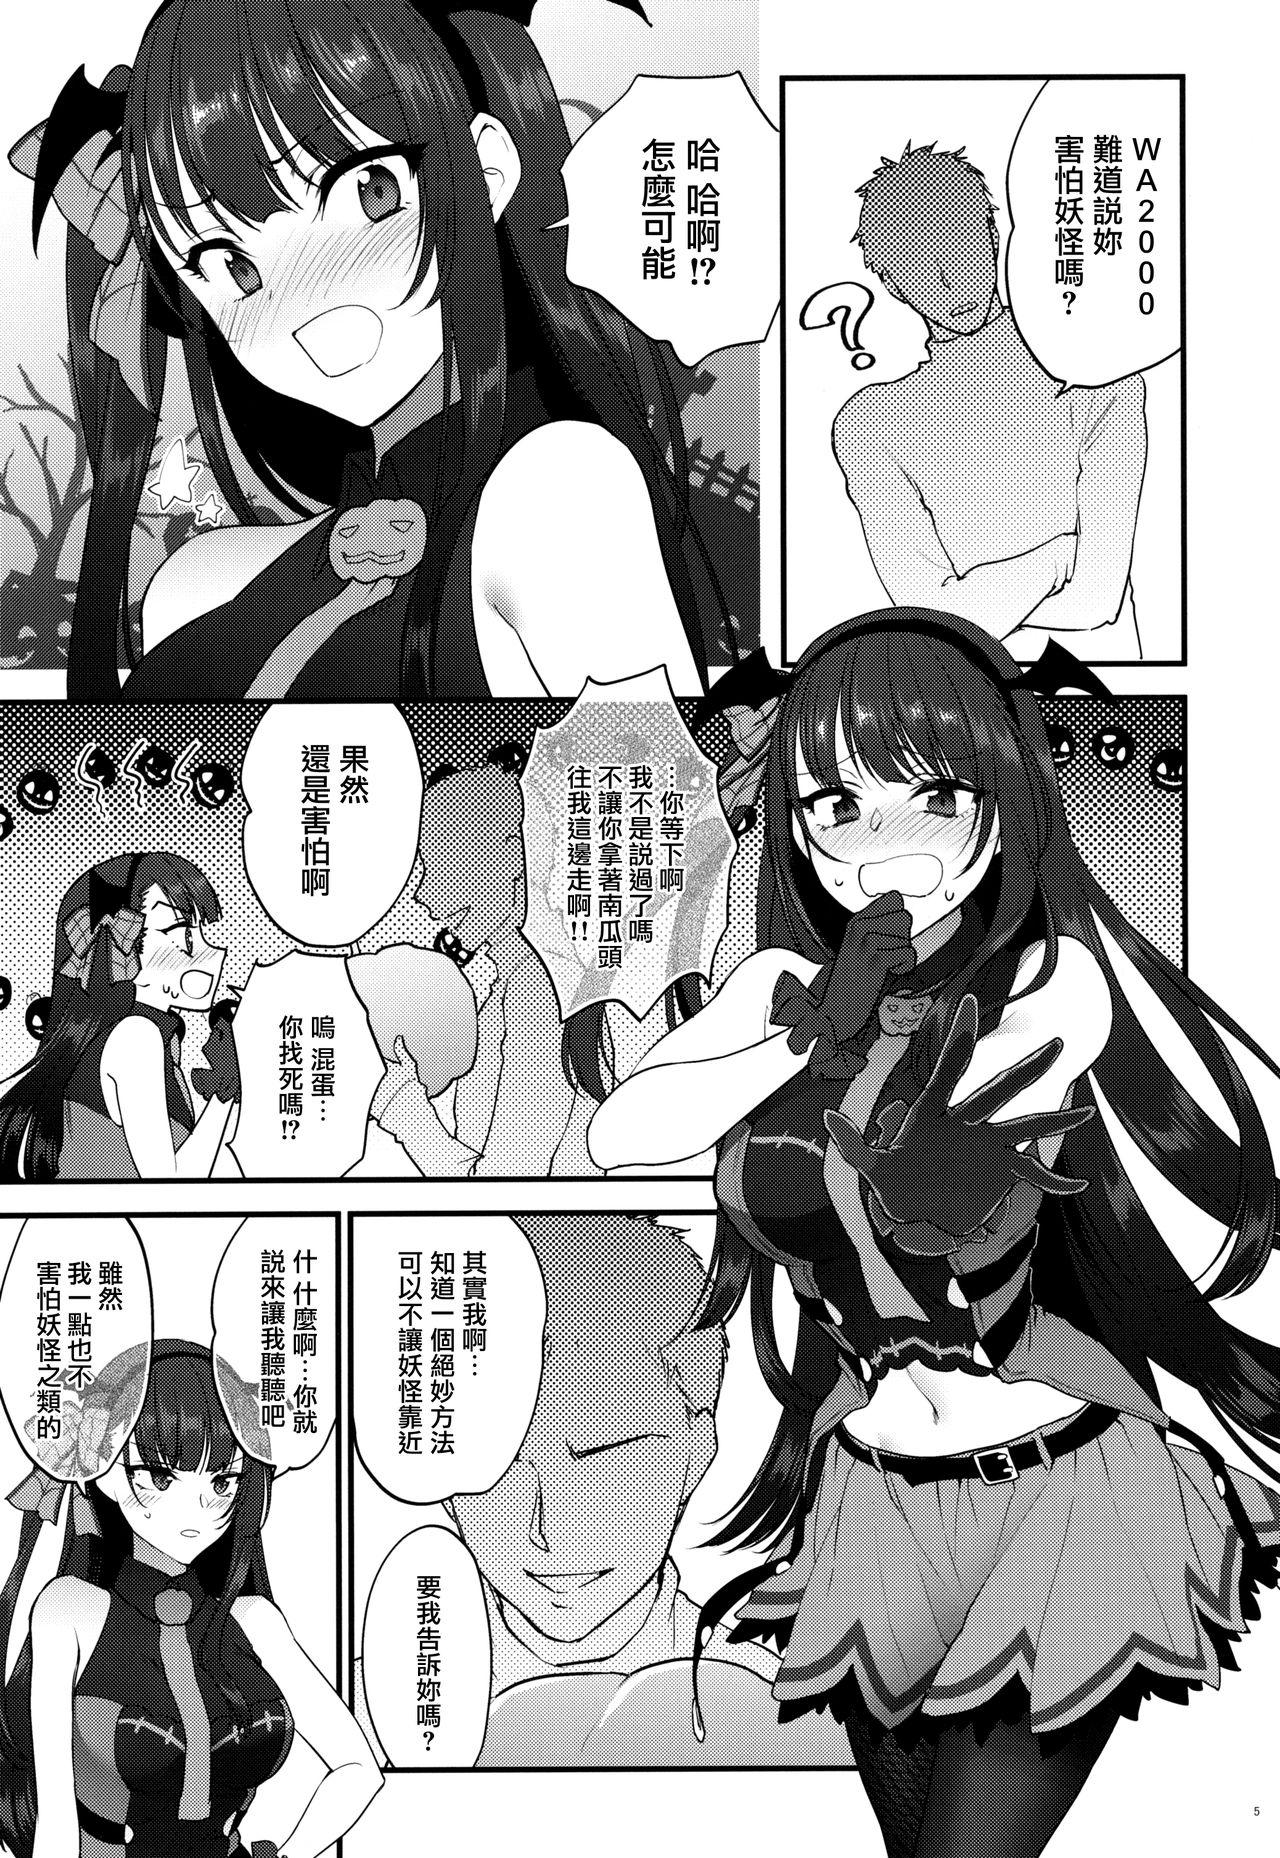 Alt Obake nante Inai! - Girls frontline Hot Girls Getting Fucked - Page 4